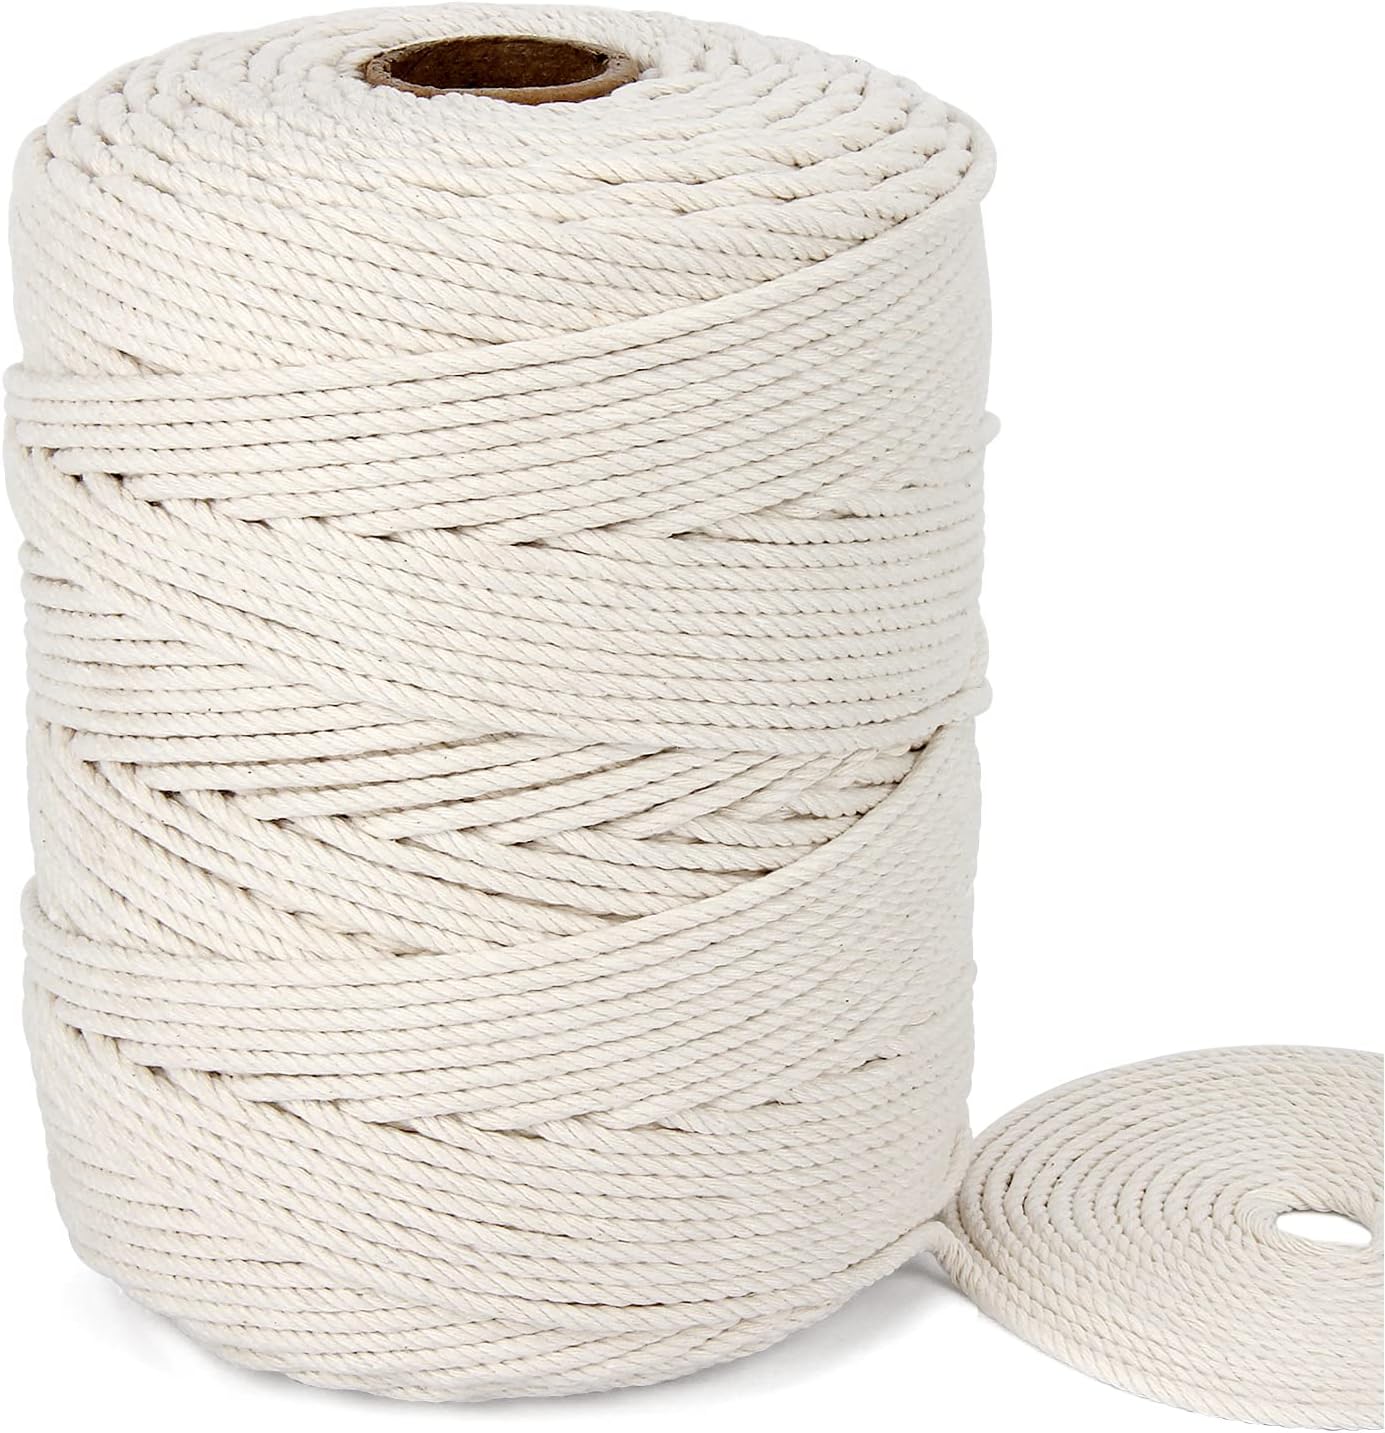 Blisstime Macrame Cord 4mm X 328 Yards Natural Cotton Macrame Rope 4 Strand Twisted Cotton Cord Soft Undyed Cotton Rope for Wall Hangings, Plant Hangers, Crafts, Knitting, Decorative Projects